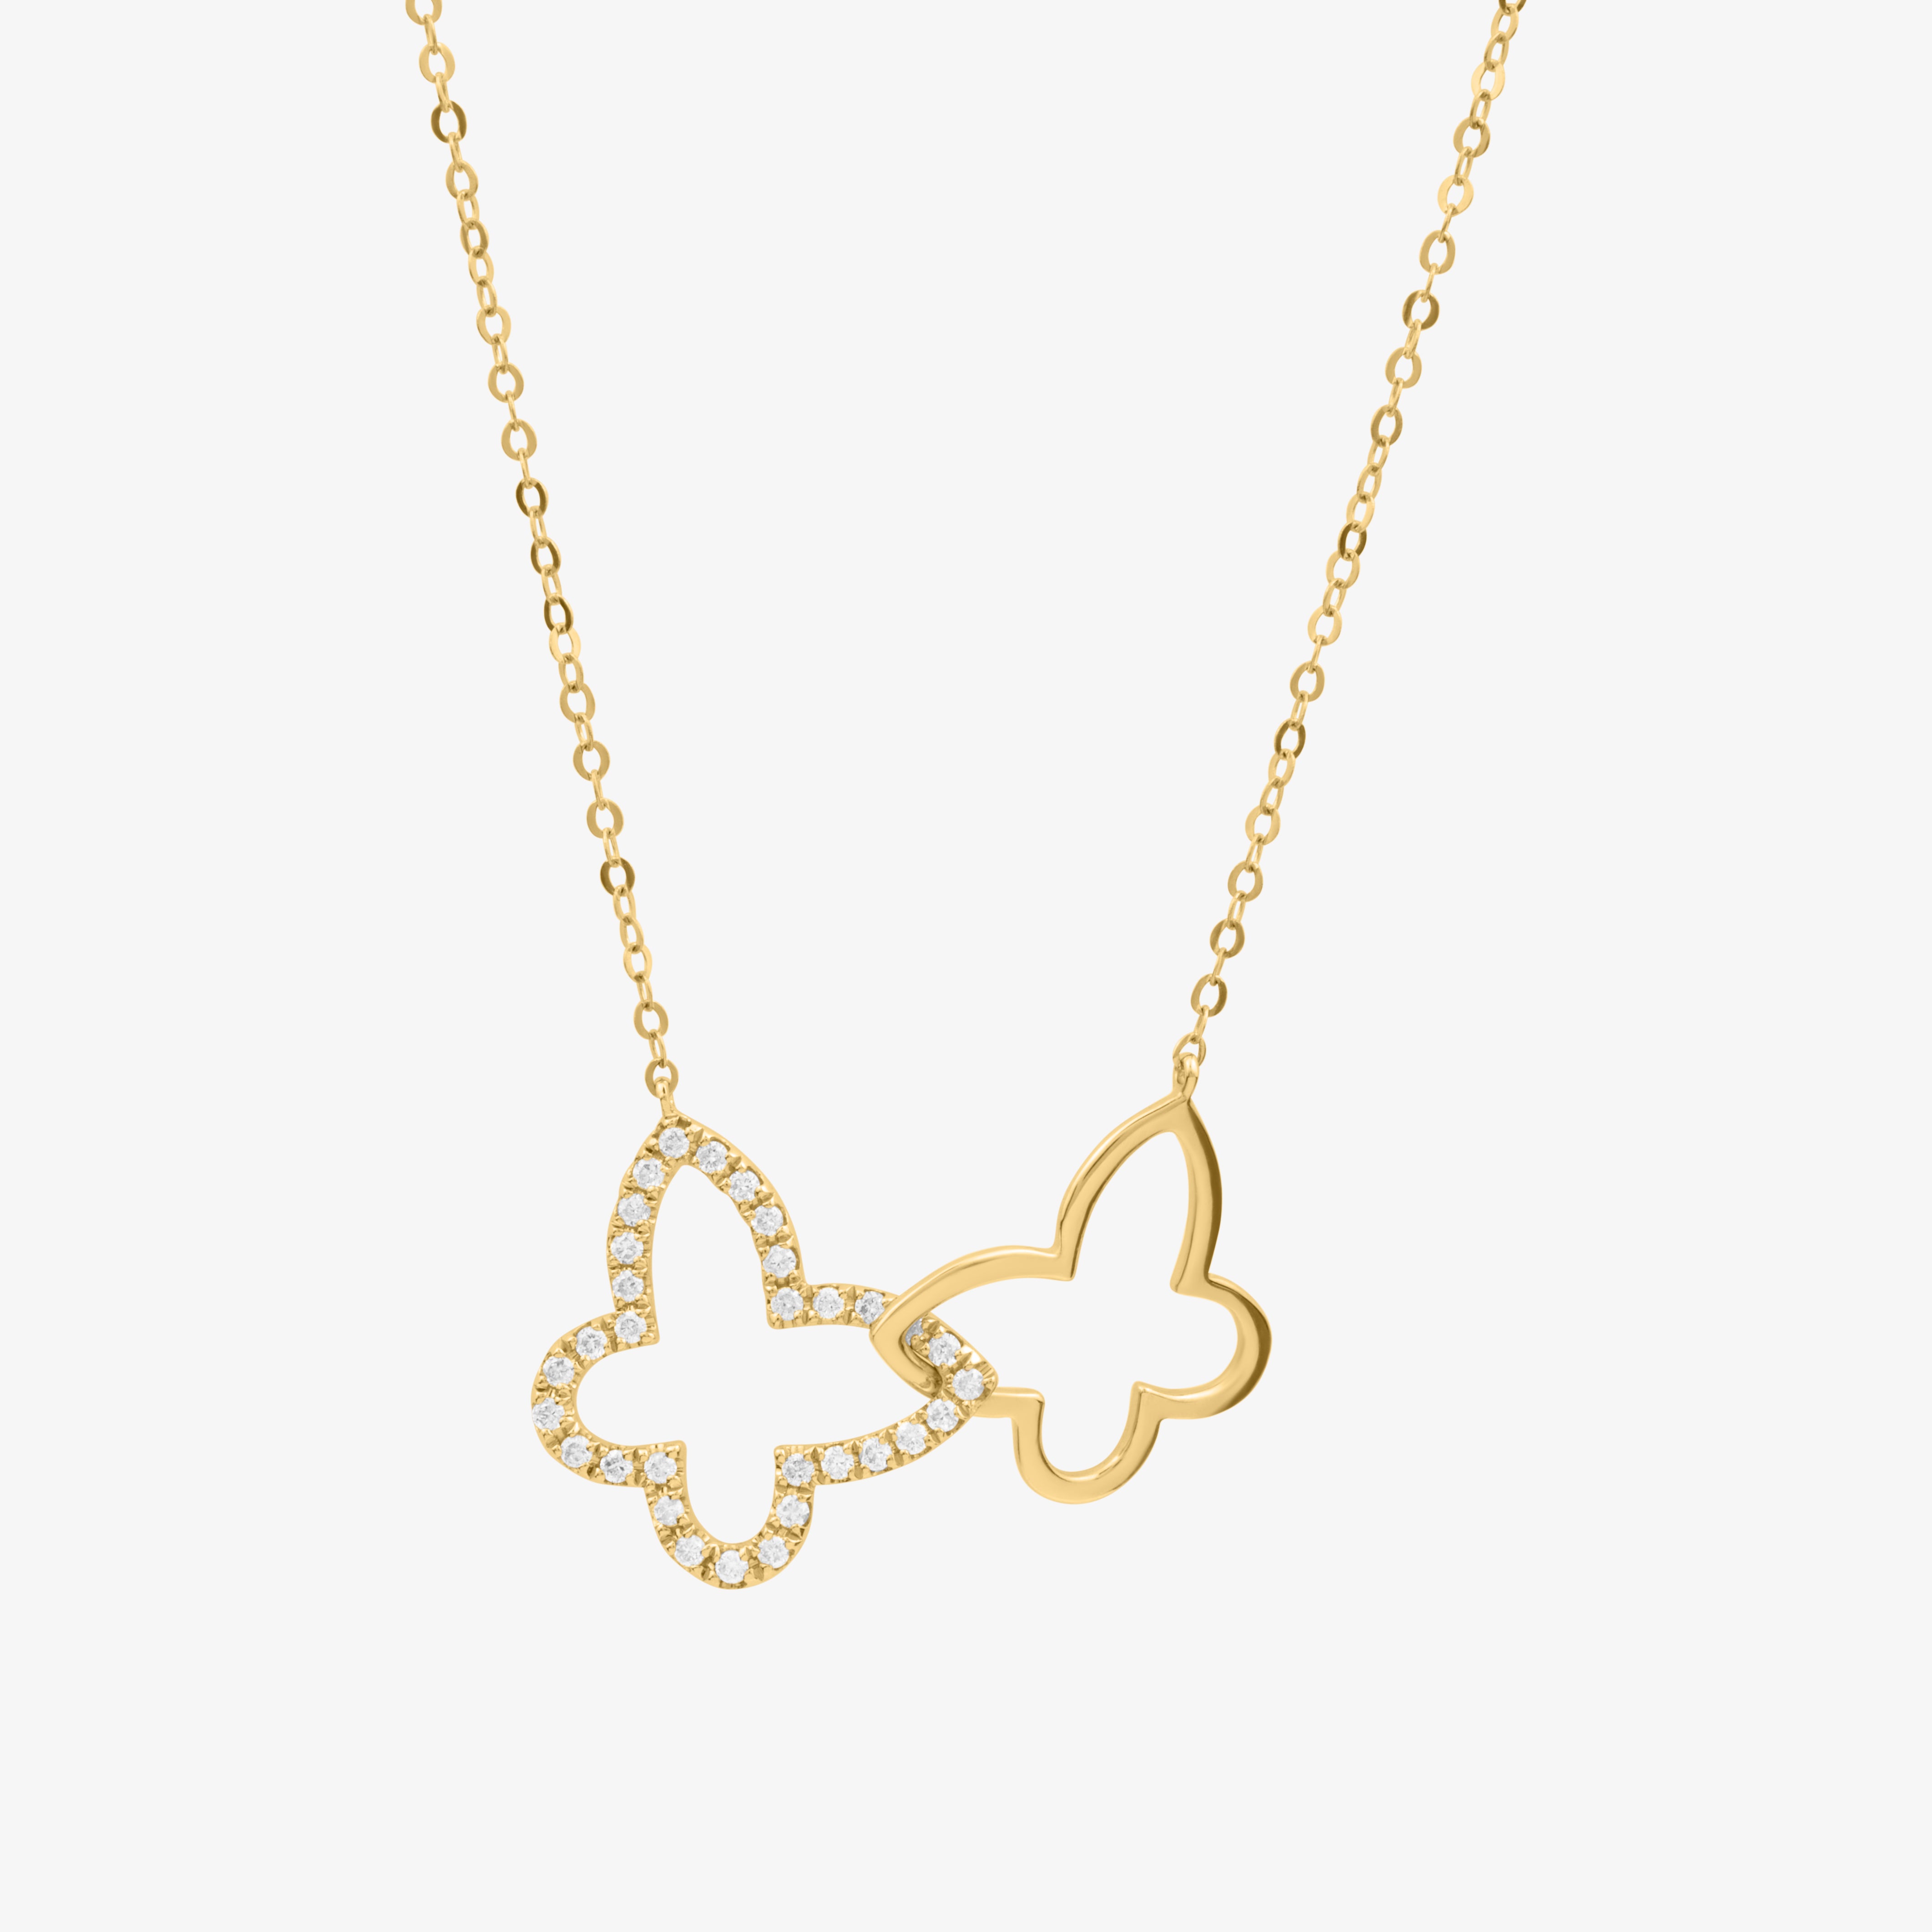 Butterfly Necklace In 18K Solid Yellow Gold With Diamonds